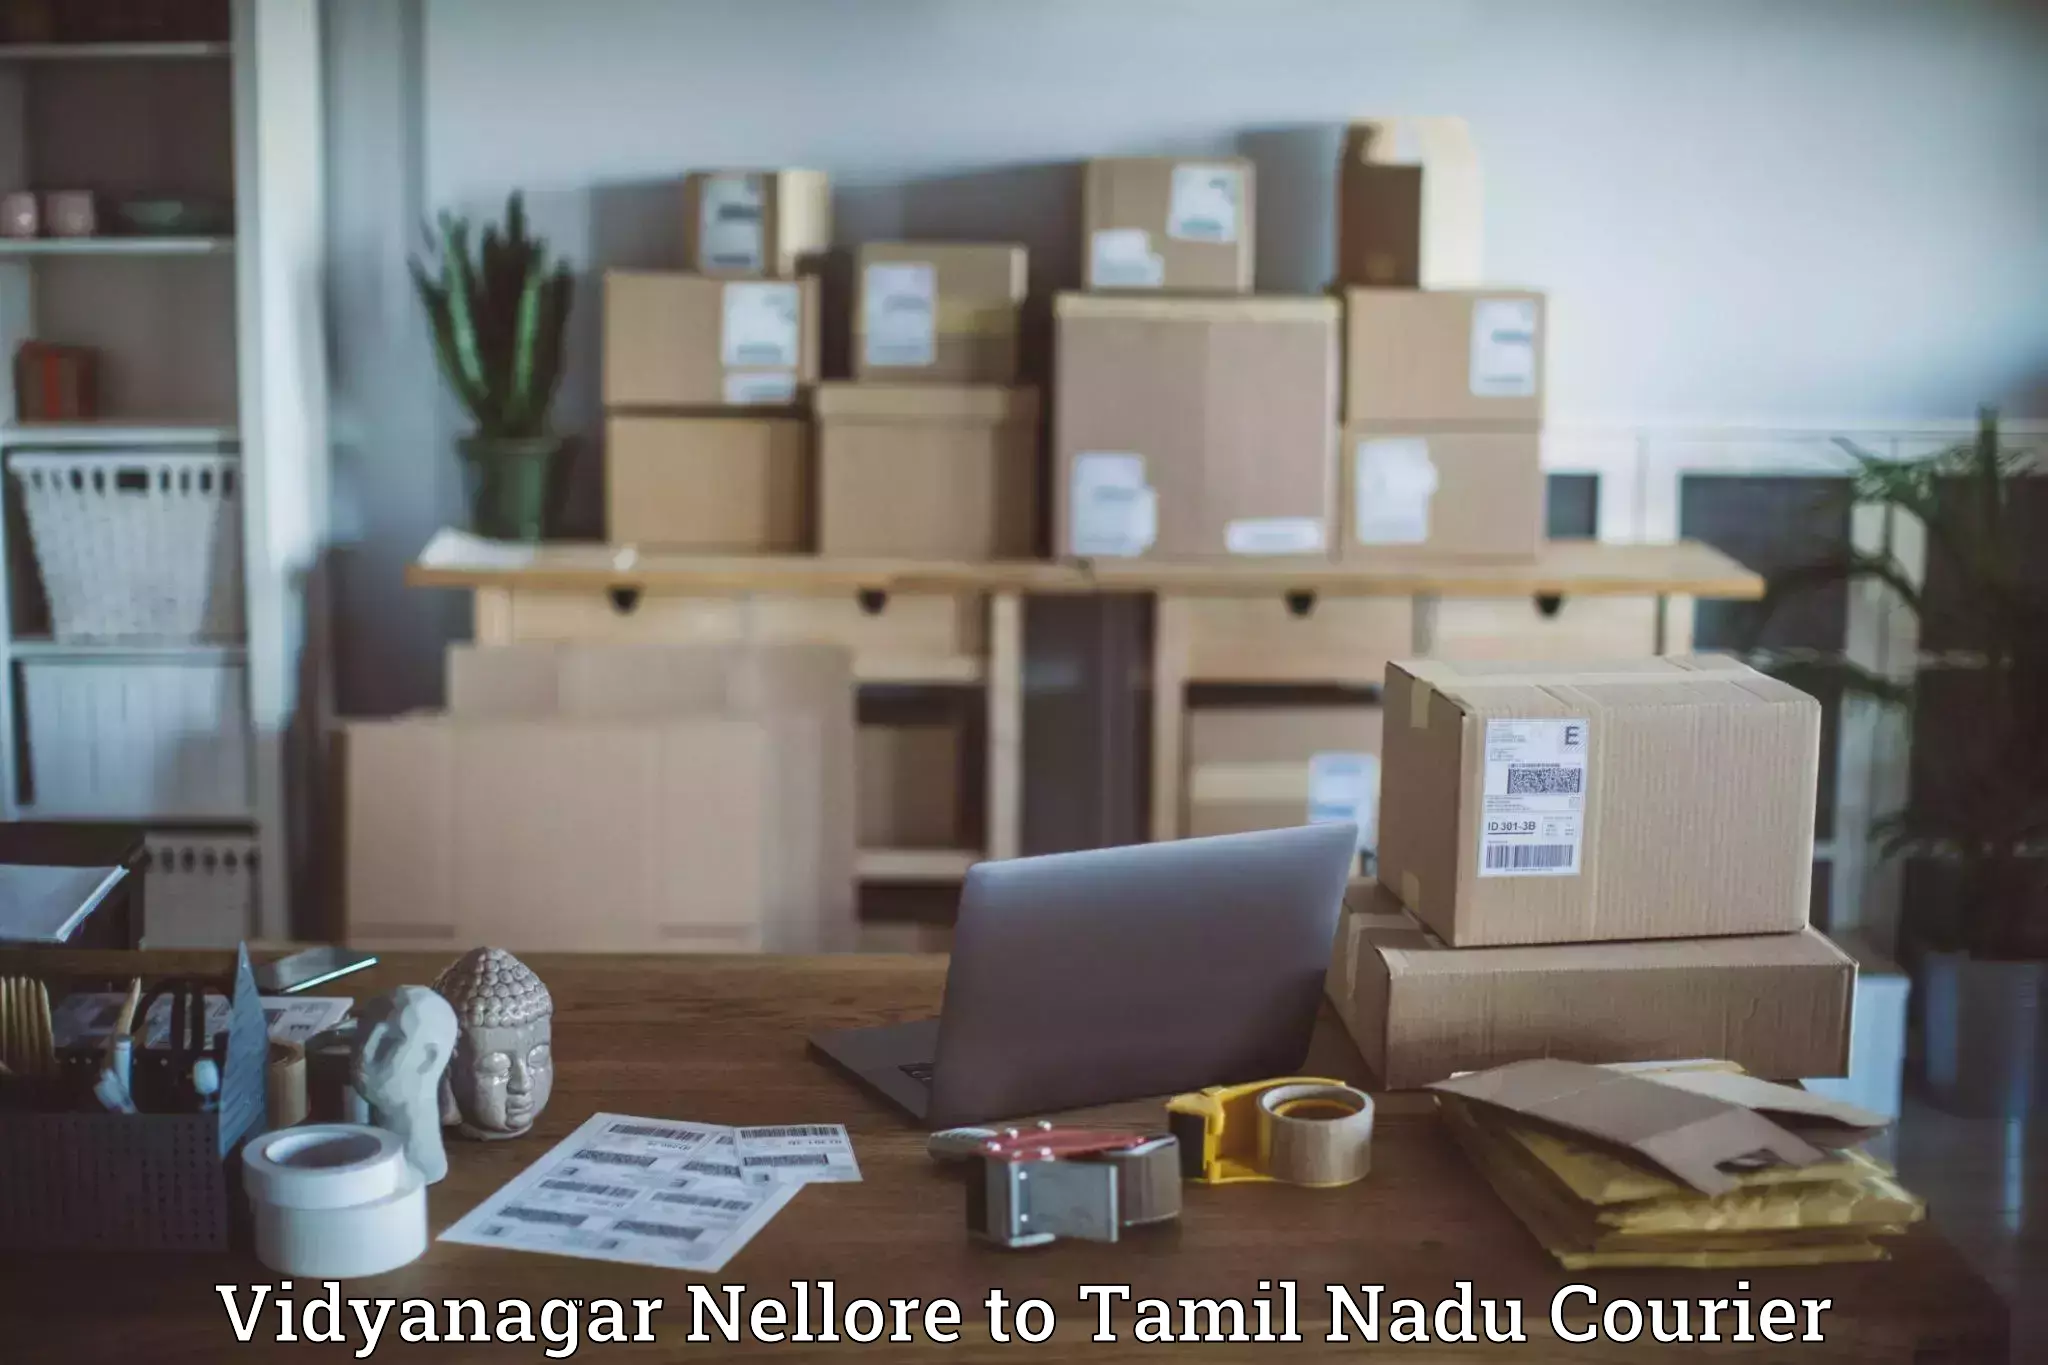 Subscription-based courier Vidyanagar Nellore to Vellore Institute of Technology